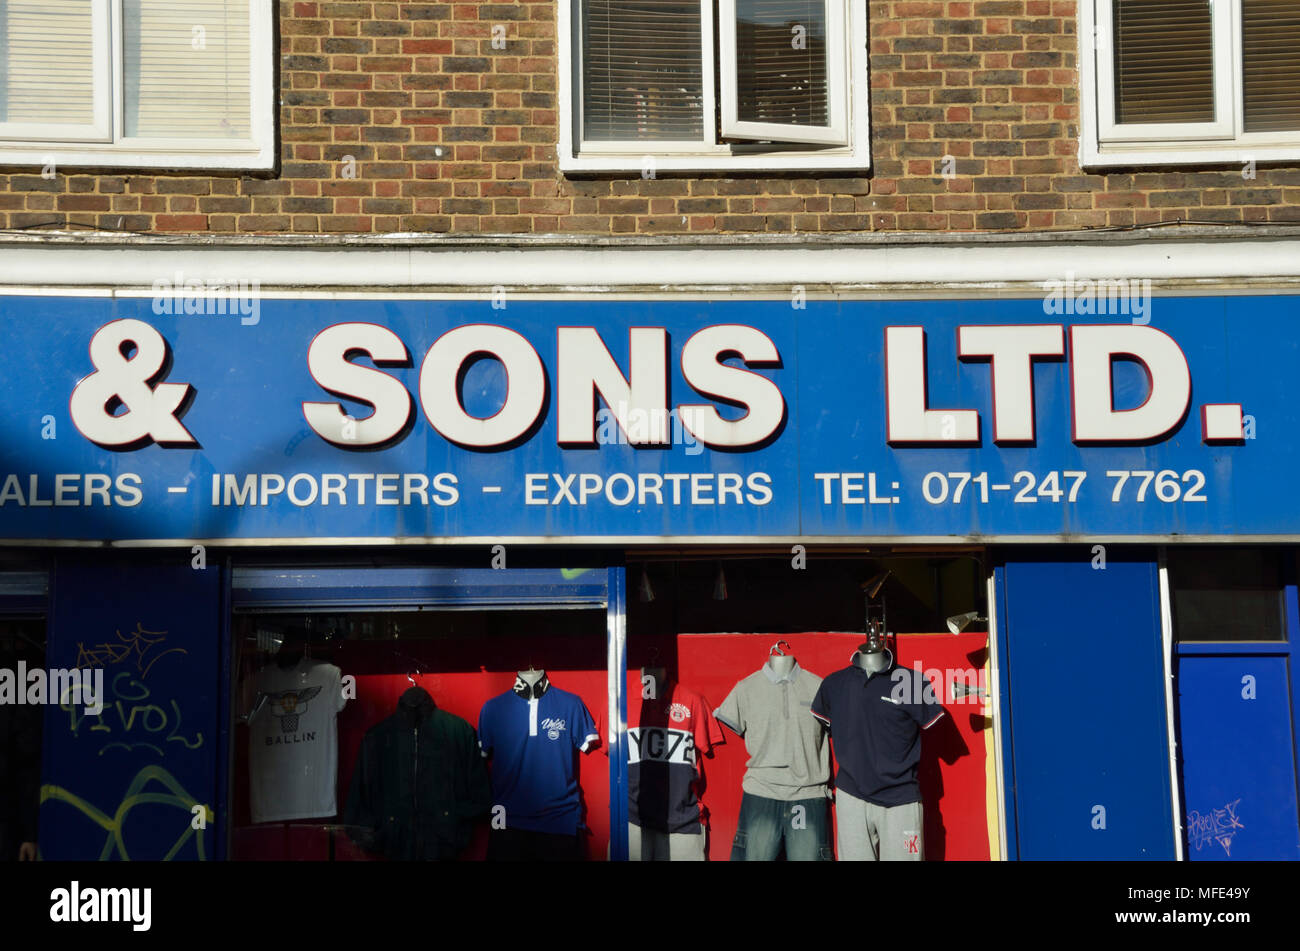 ’And Sons Ltd’ sign above a clothing wholesale shop. Stock Photo